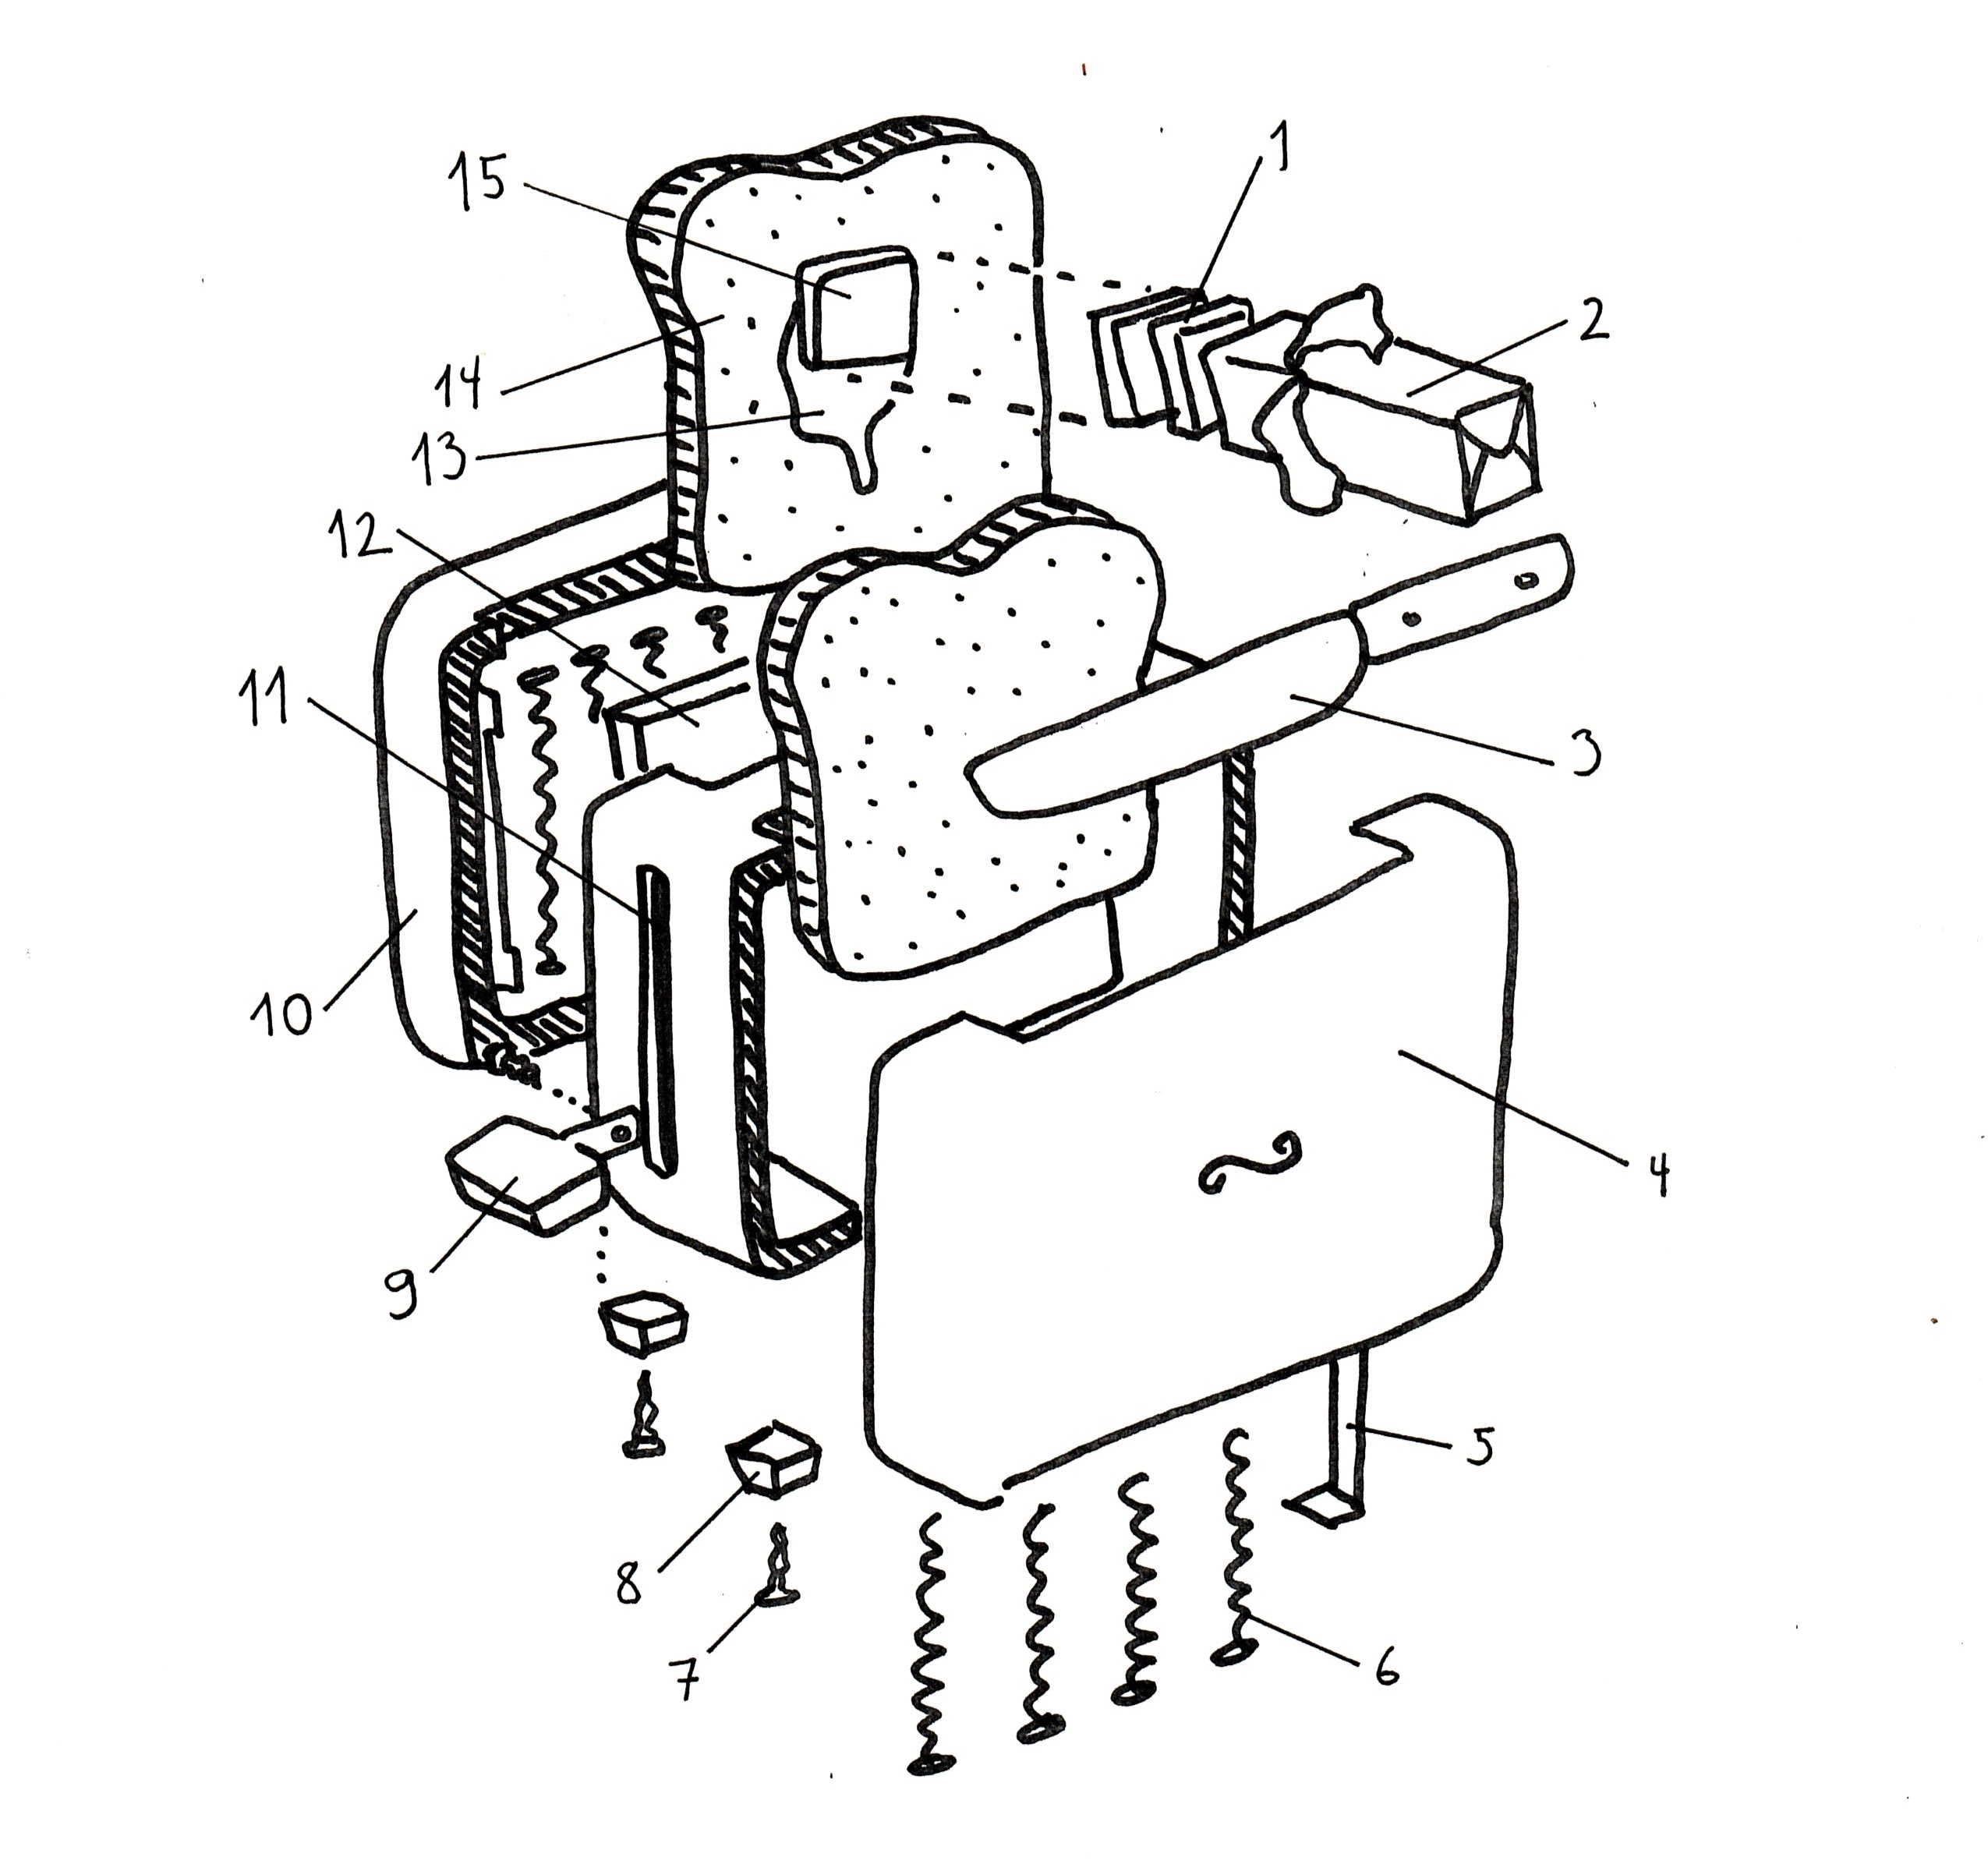 a line drawing of a toaster, exploded so that each part is shown and numbered as in a patent drawing, including toast and butter